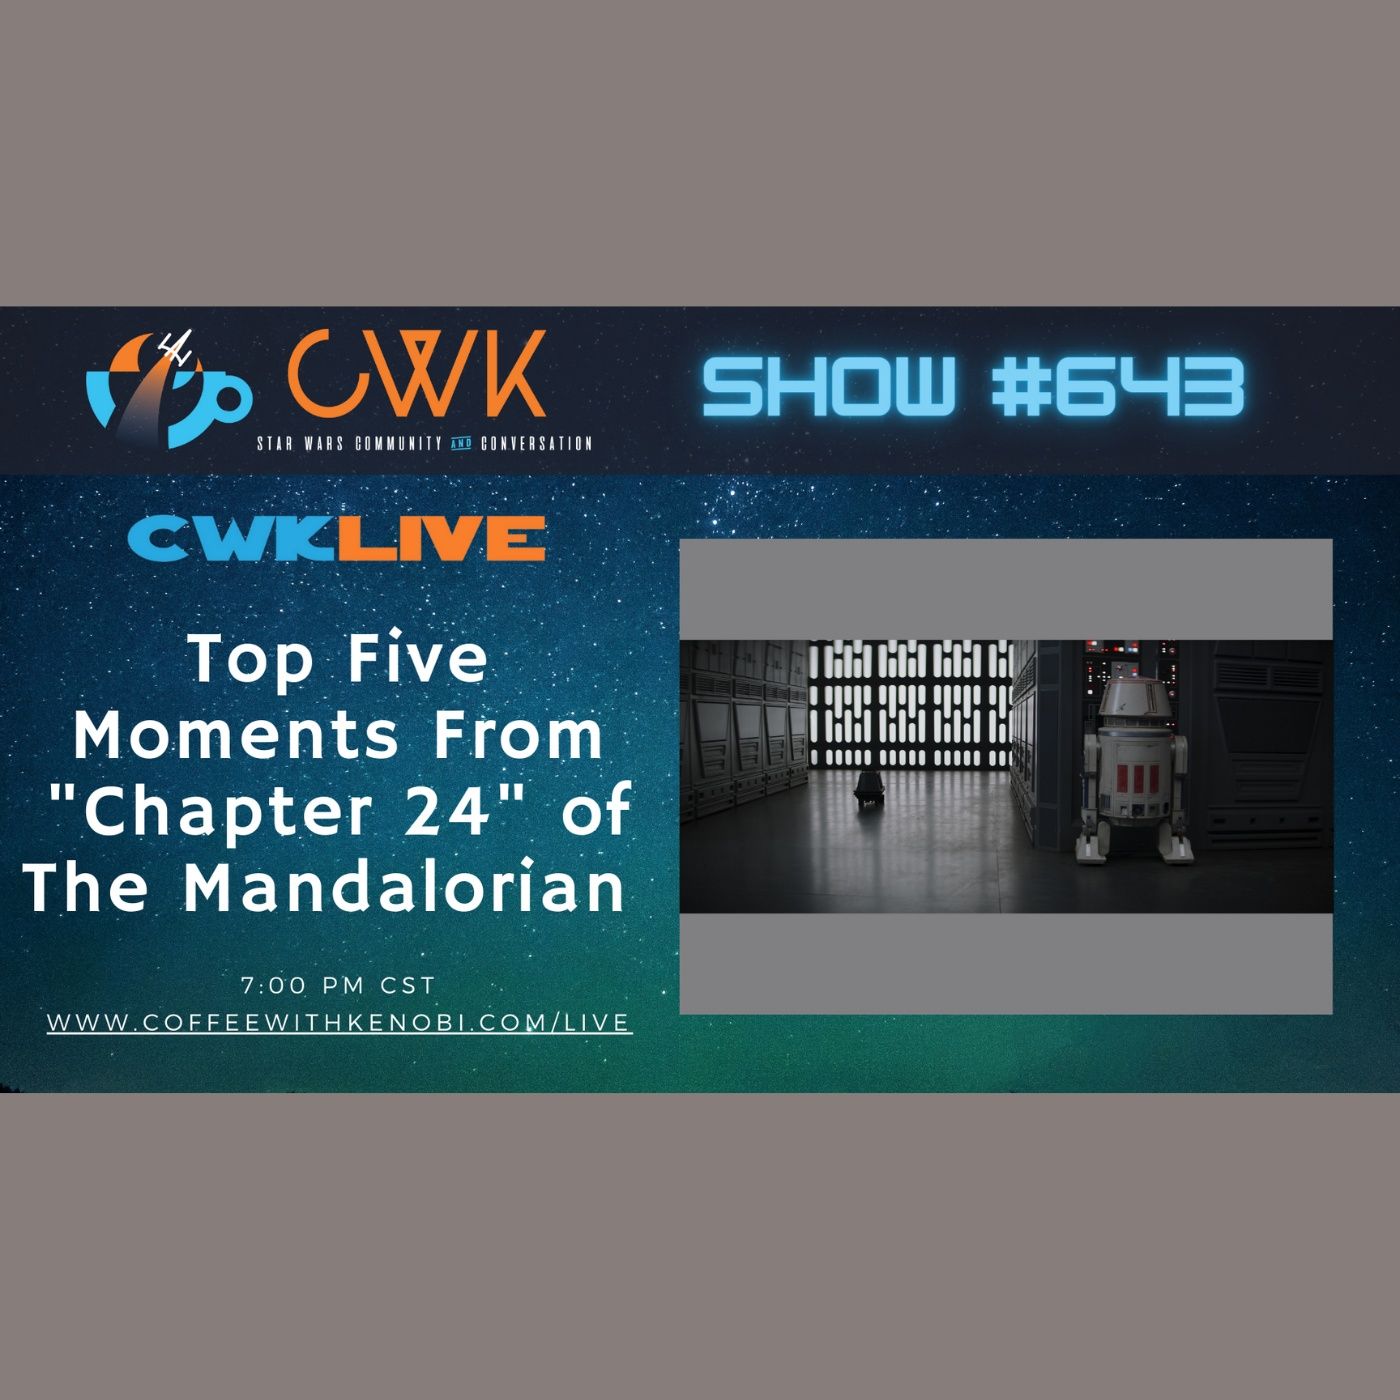 CWK Show #643 LIVE: Top 5 Moments from The Mandalorian ”The Return”